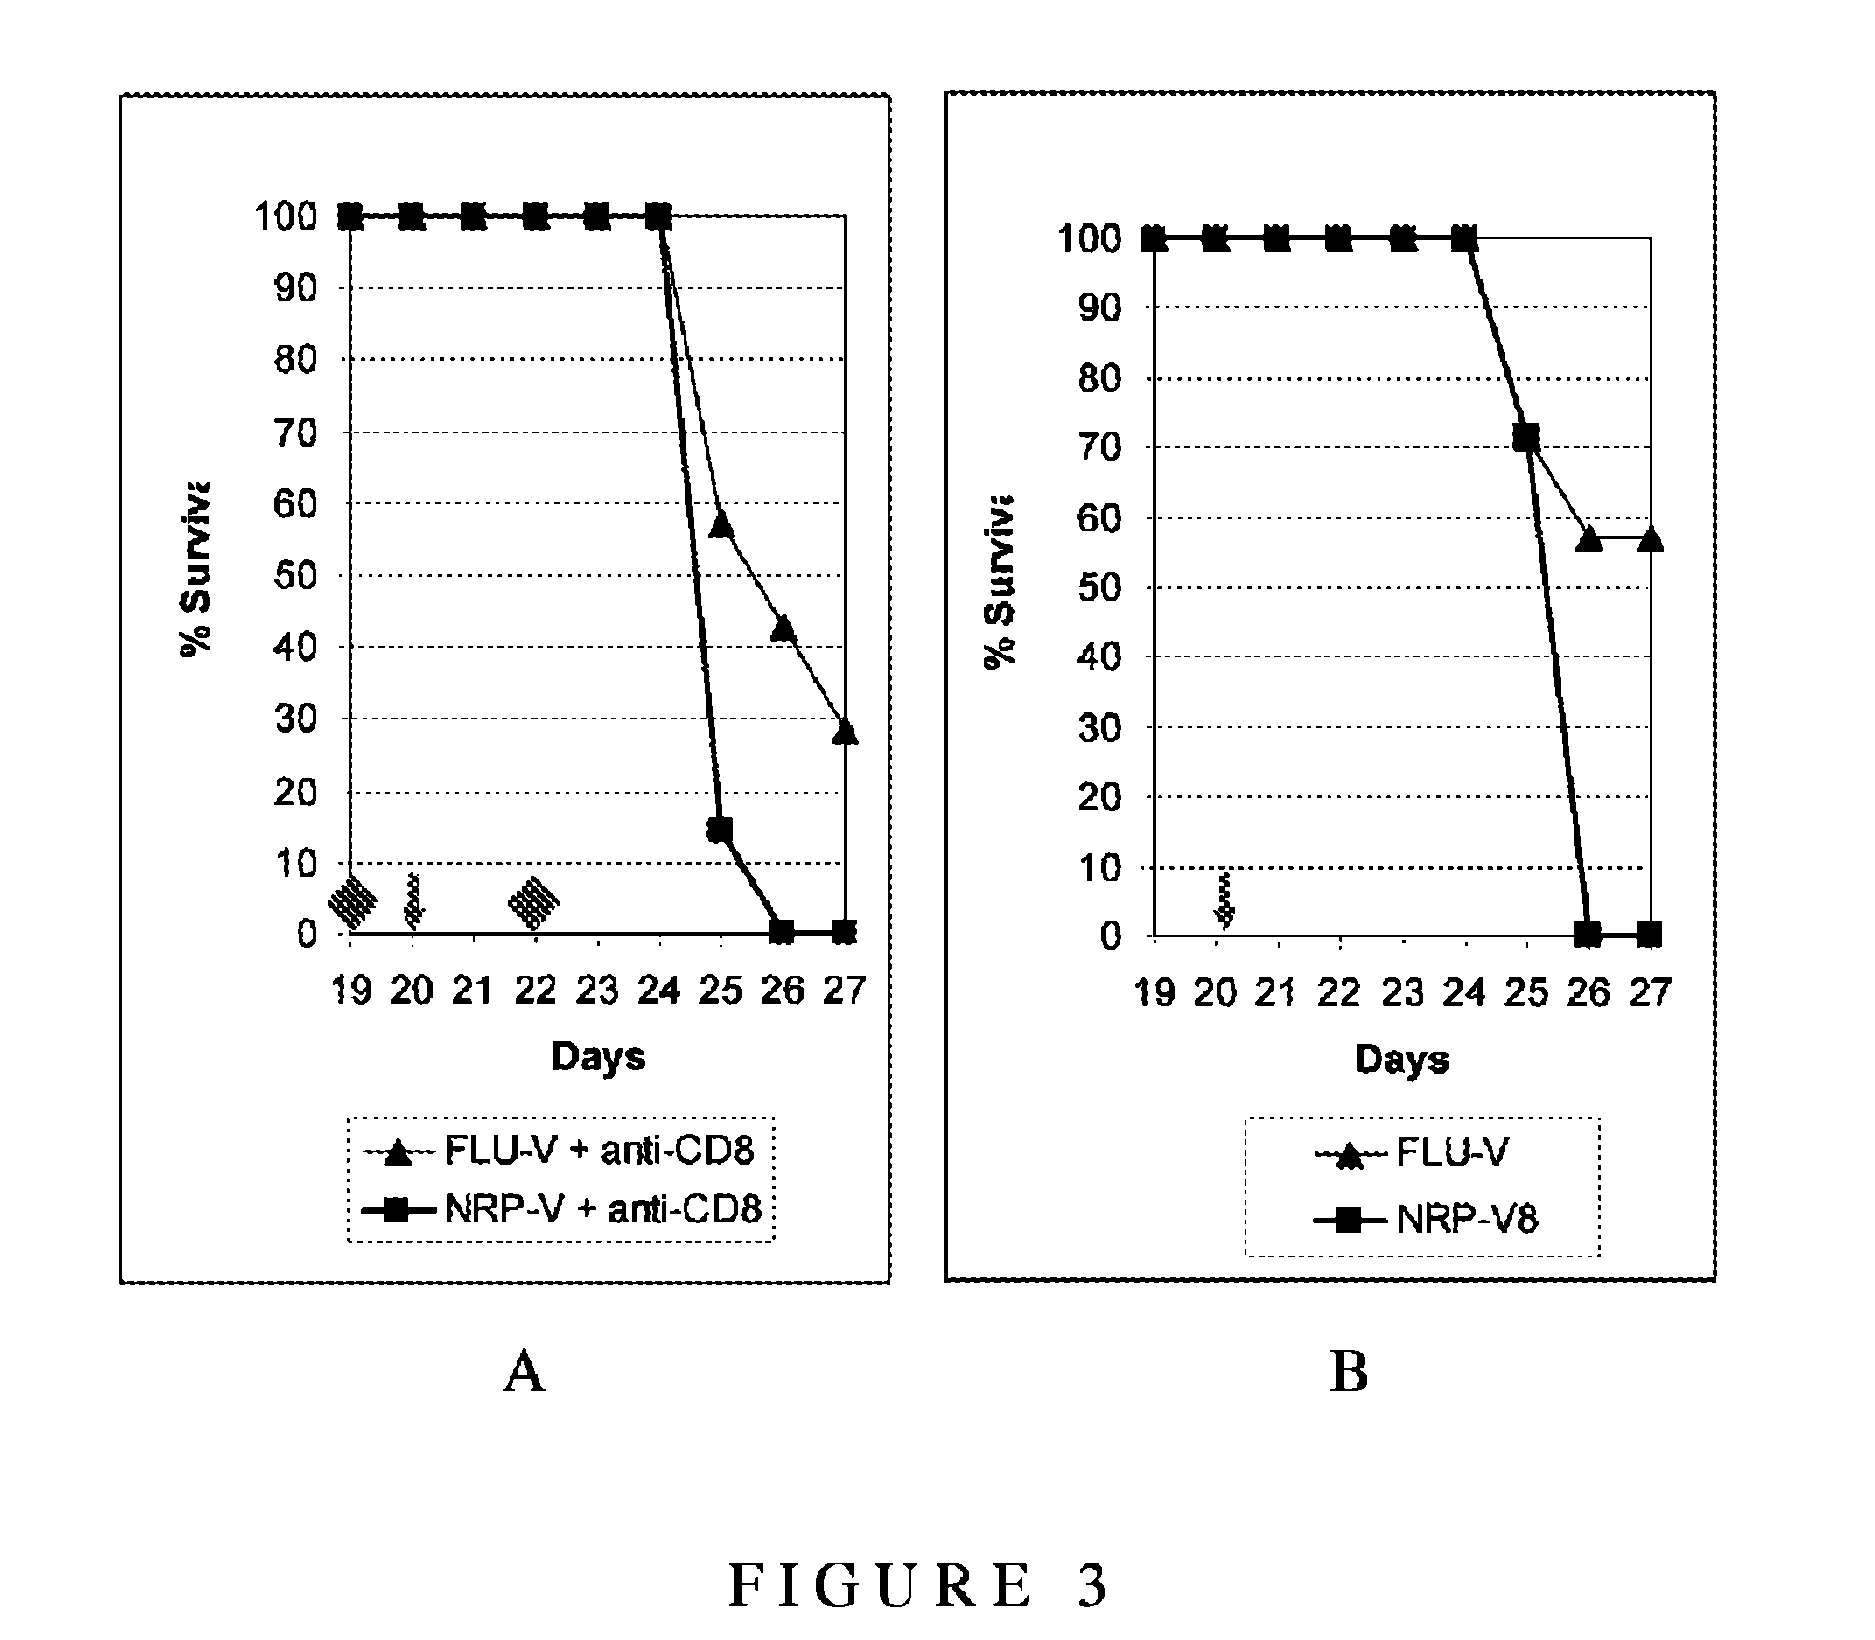 Peptide sequences and compositions